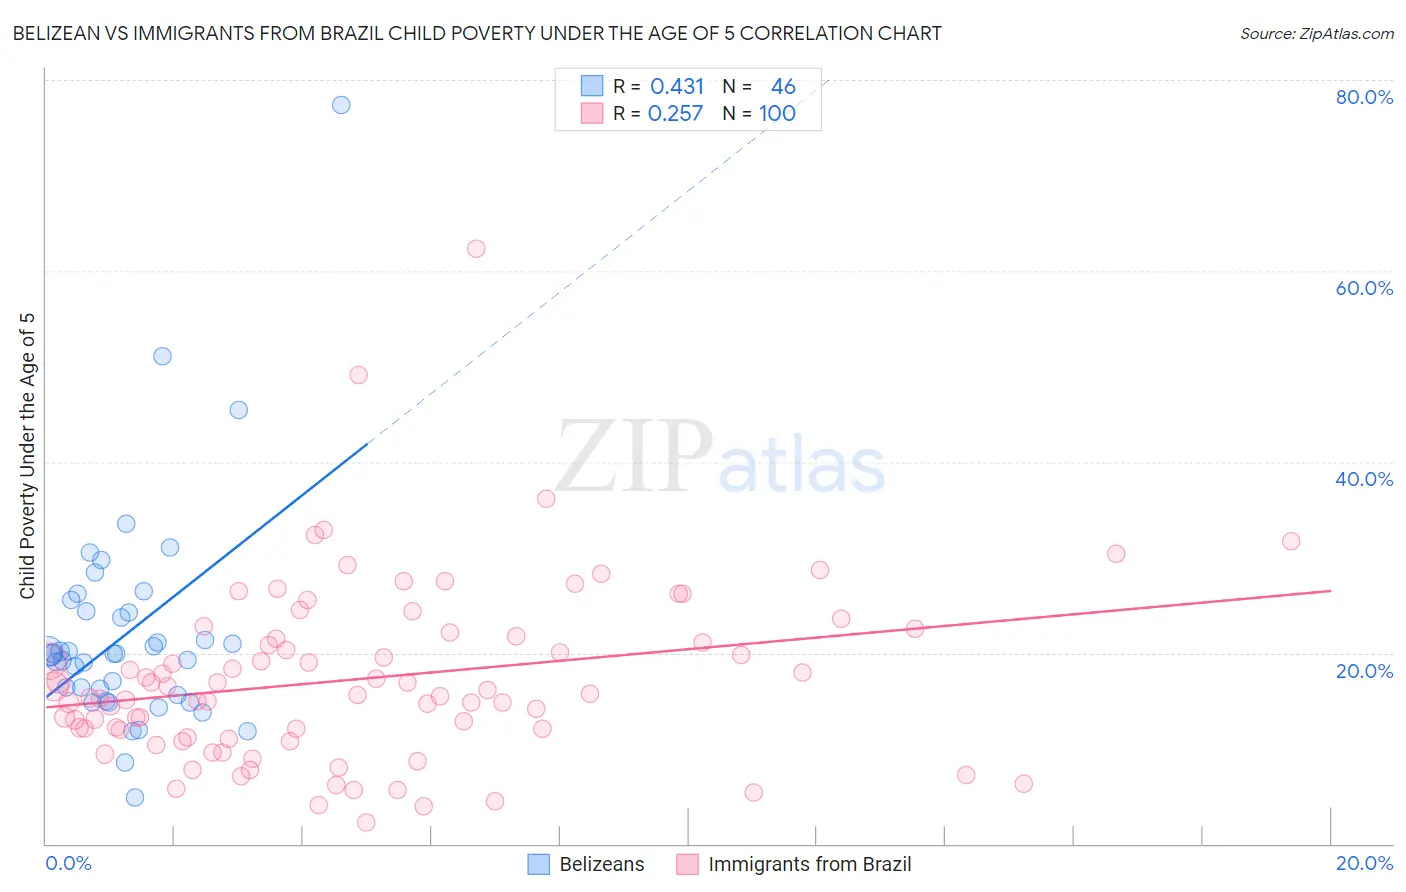 Belizean vs Immigrants from Brazil Child Poverty Under the Age of 5